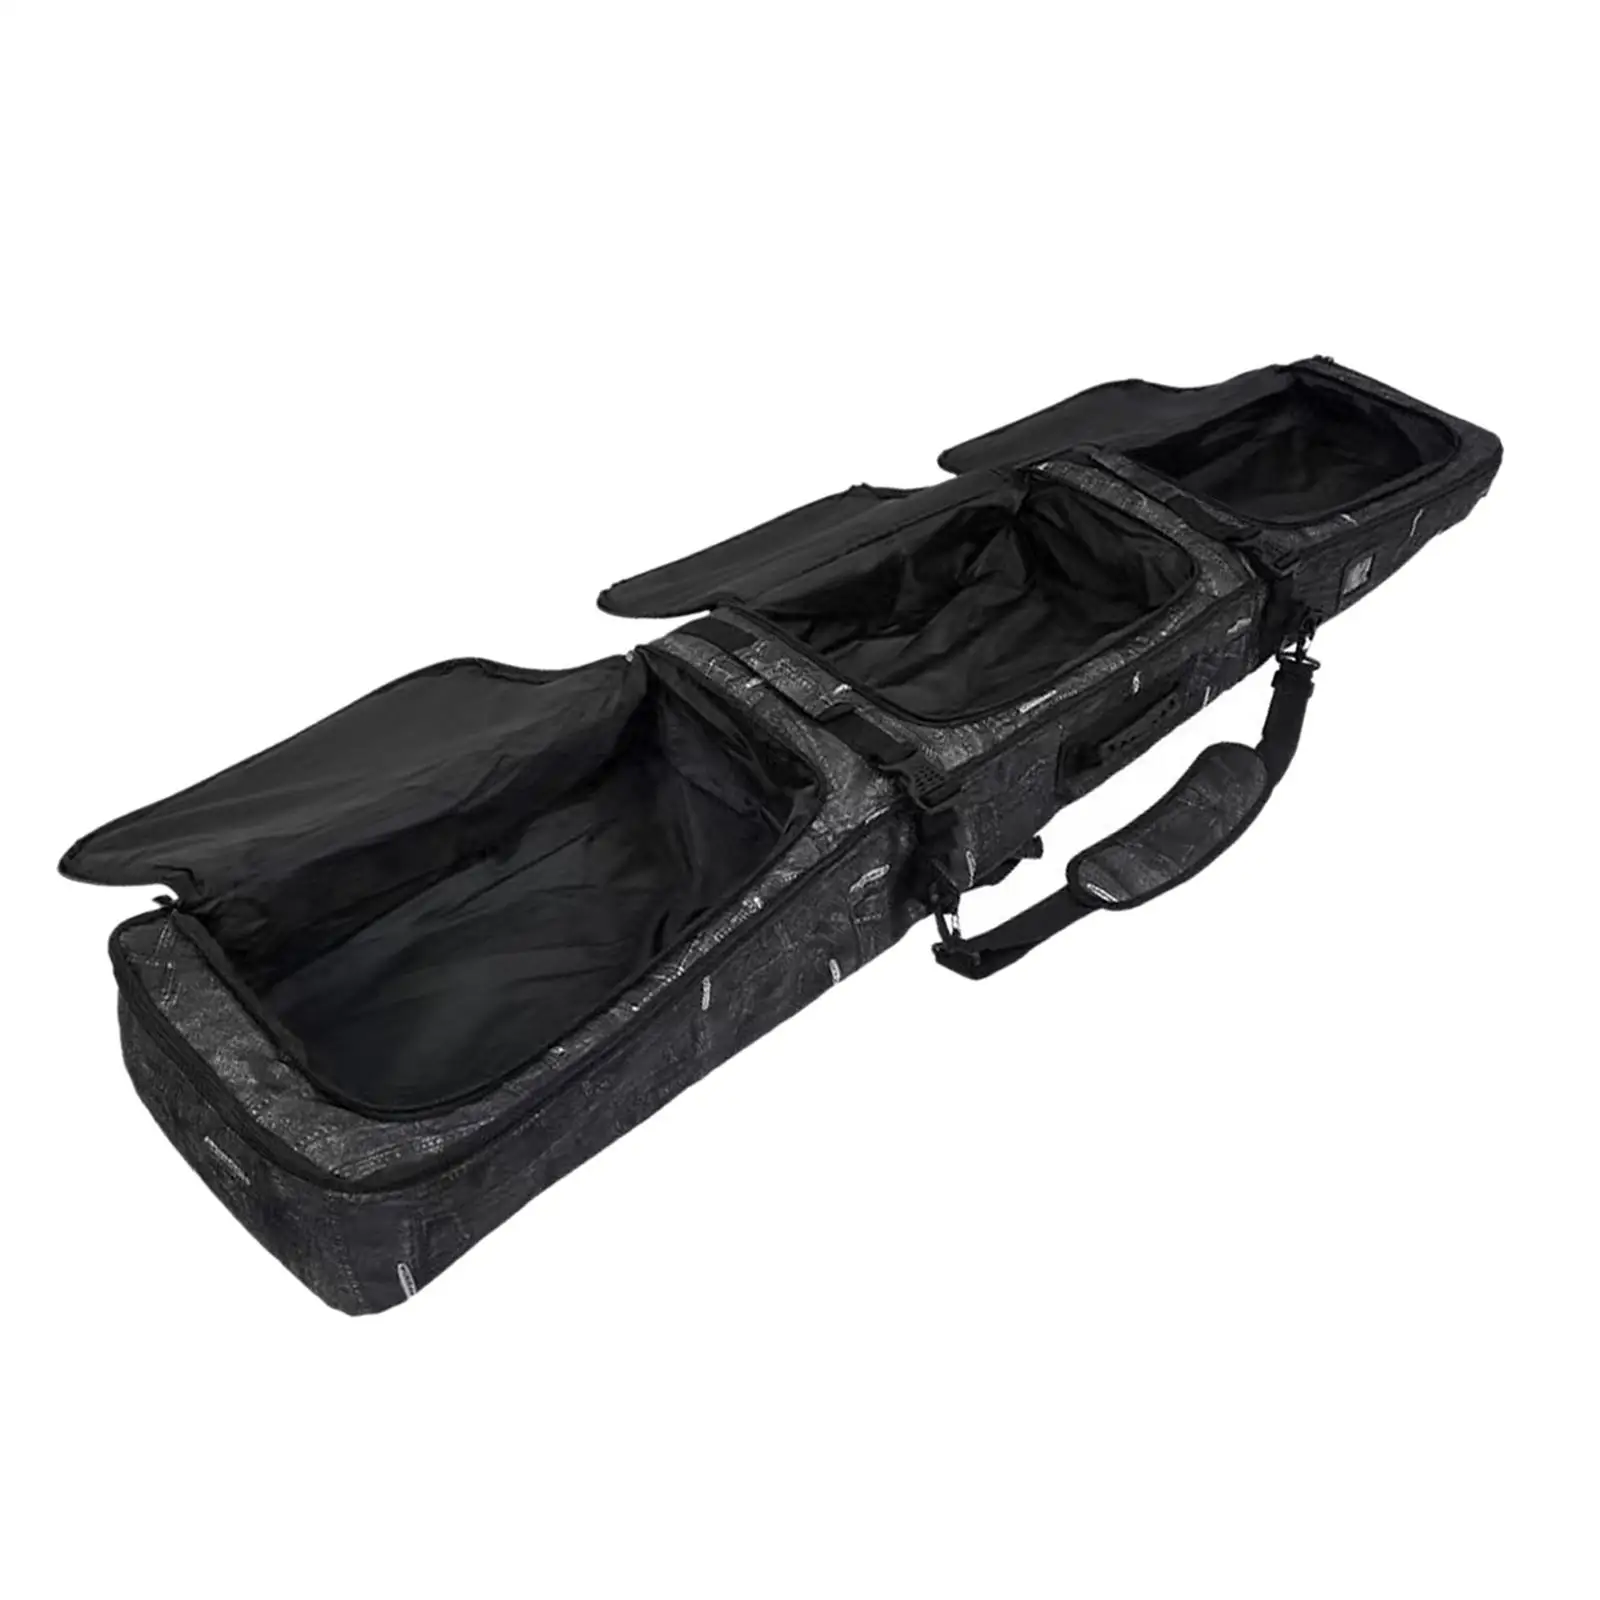 Snowboard Bag with Wheels Protective Gear Folding Carrying Bag Waterproof